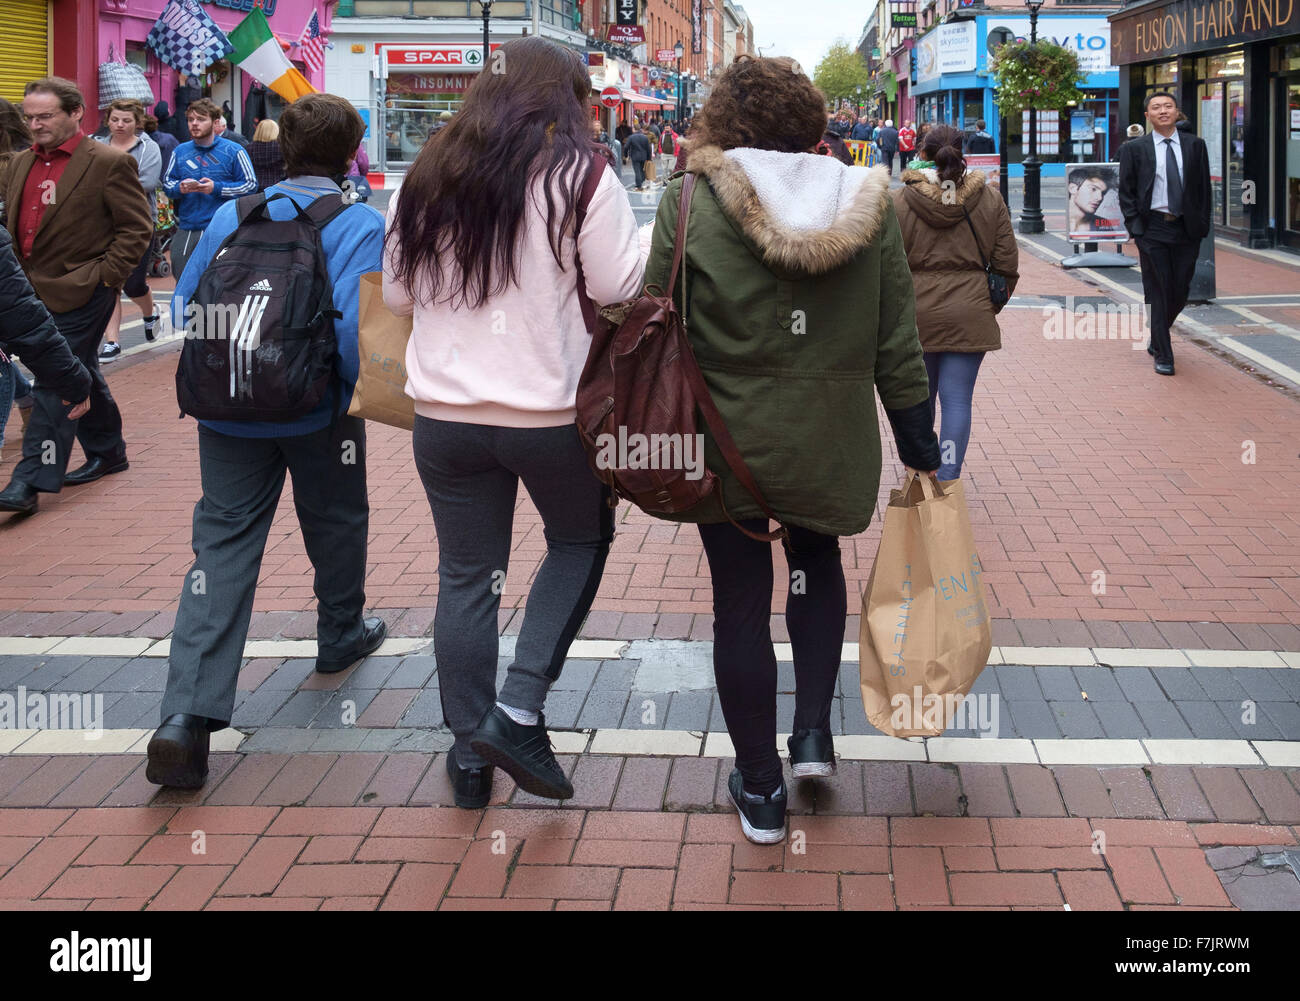 people shopping high street uk carry bag bags Stock Photo